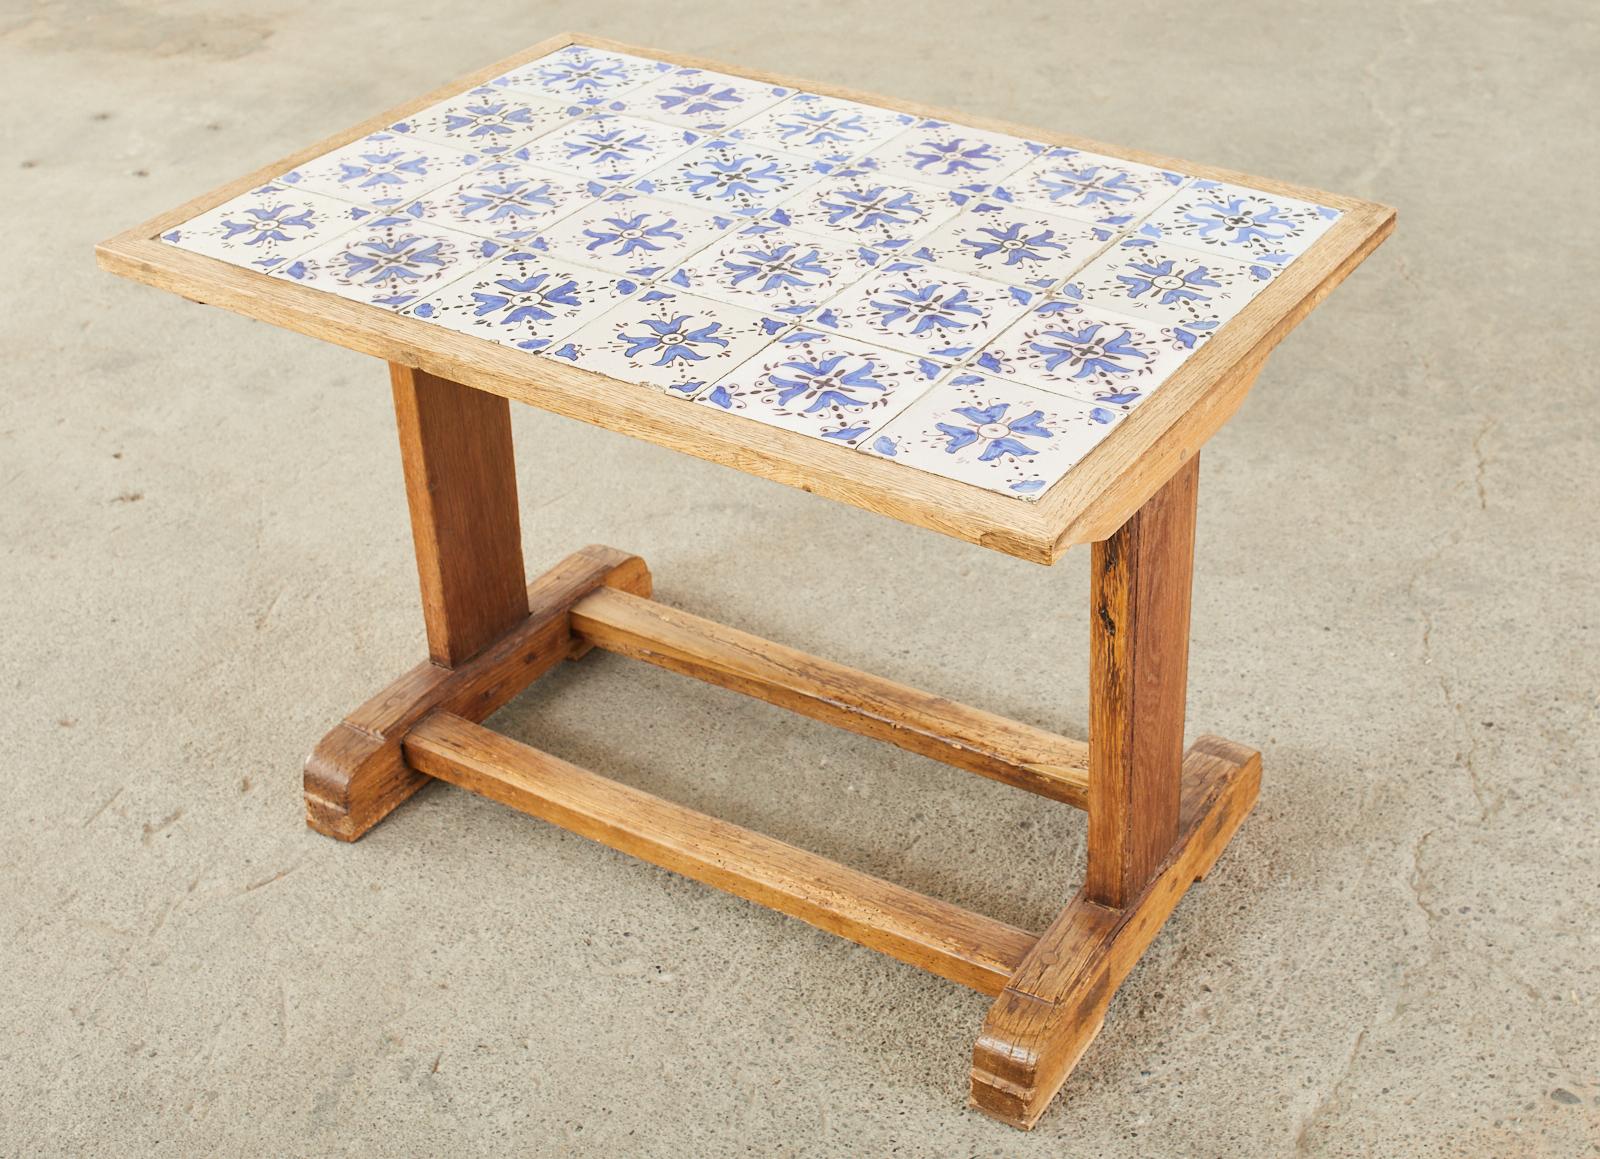 Hand-Crafted Midcentury Danish Oak Porcelain Tile Top Coffee Table